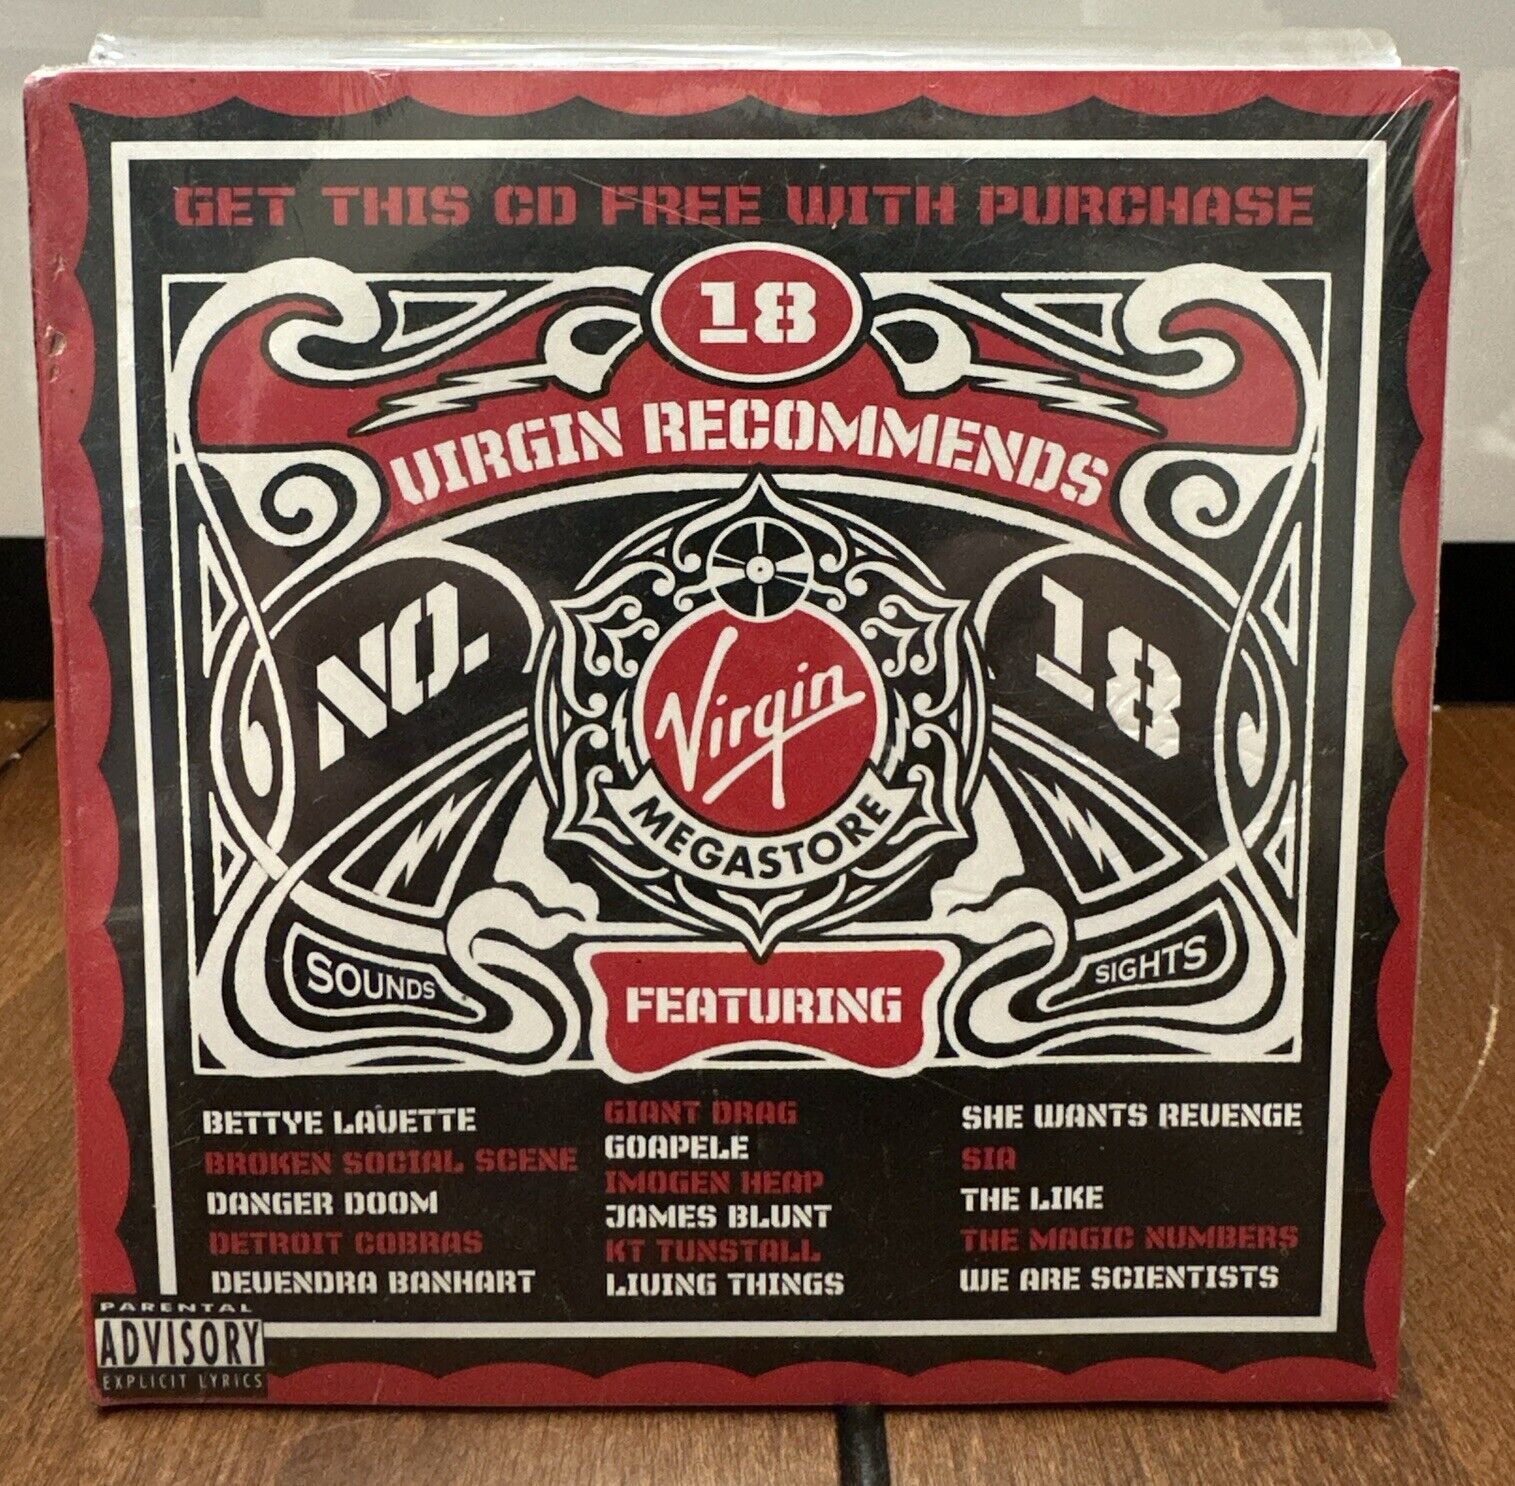 Virgin Records VIRGIN RECOMMENDS #18 Various Artists Promo CD [PA] New, Sealed